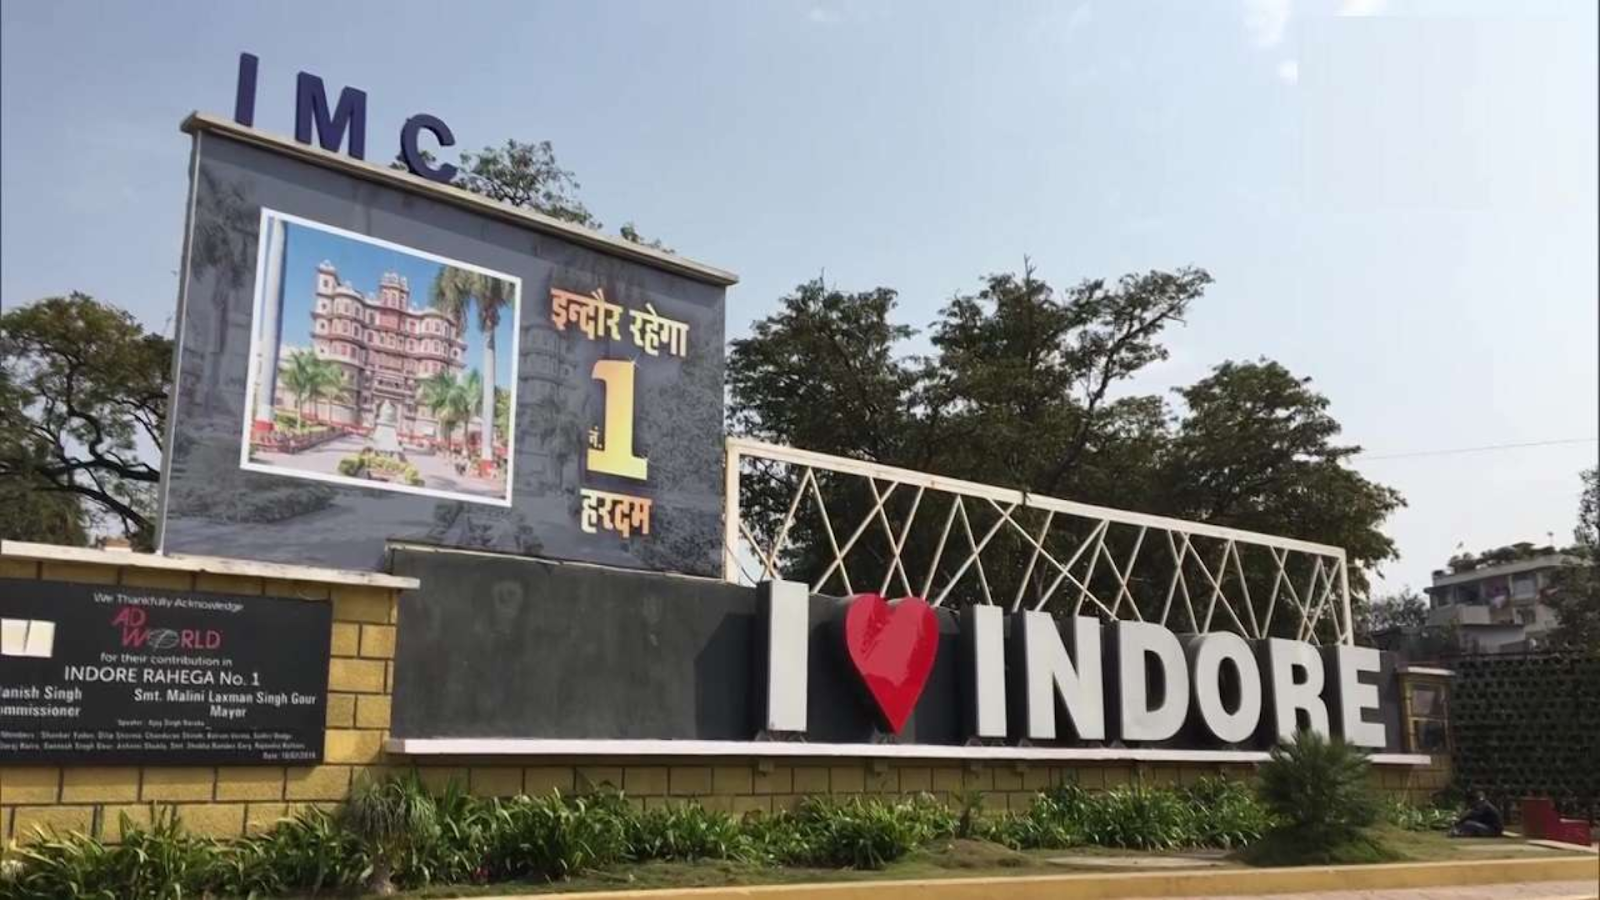 Indore - The fastest growing cities in India.